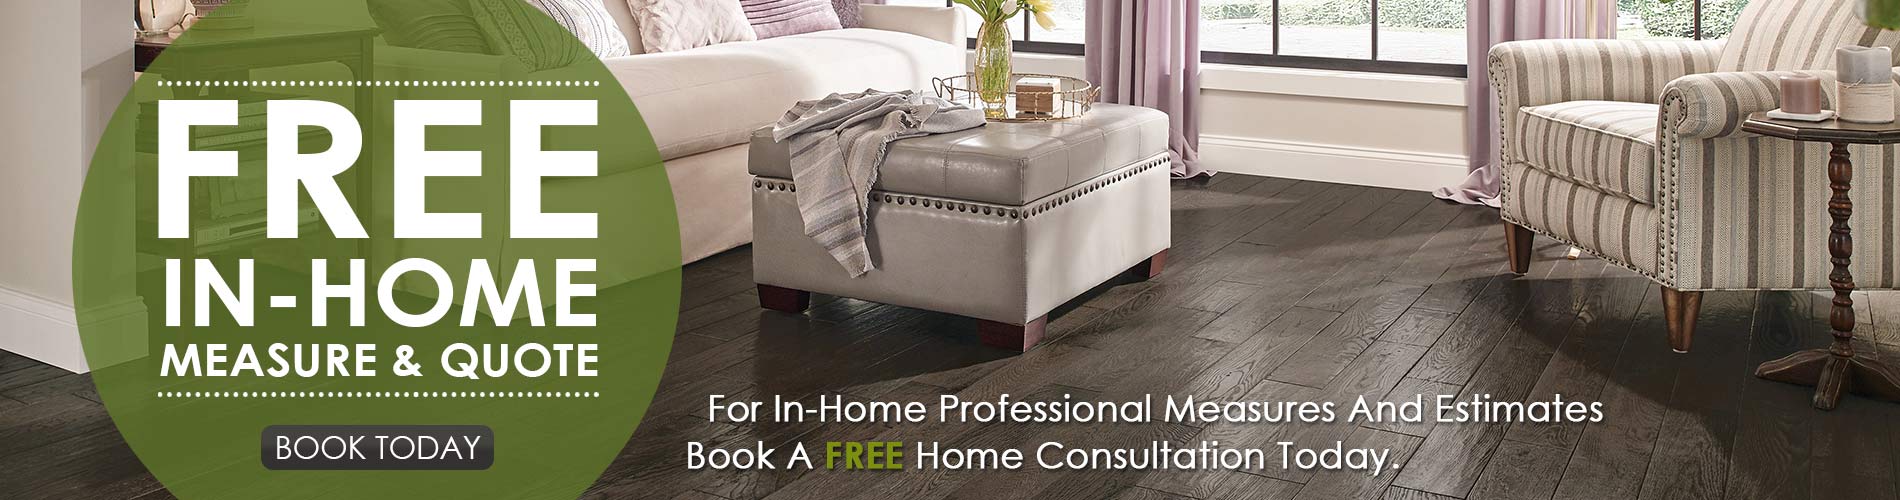 Free In-Home Measure & Quote | For In-Home Professional Measures And Estimates Book A FREE Home Consultation Today. | BOOK TODAY